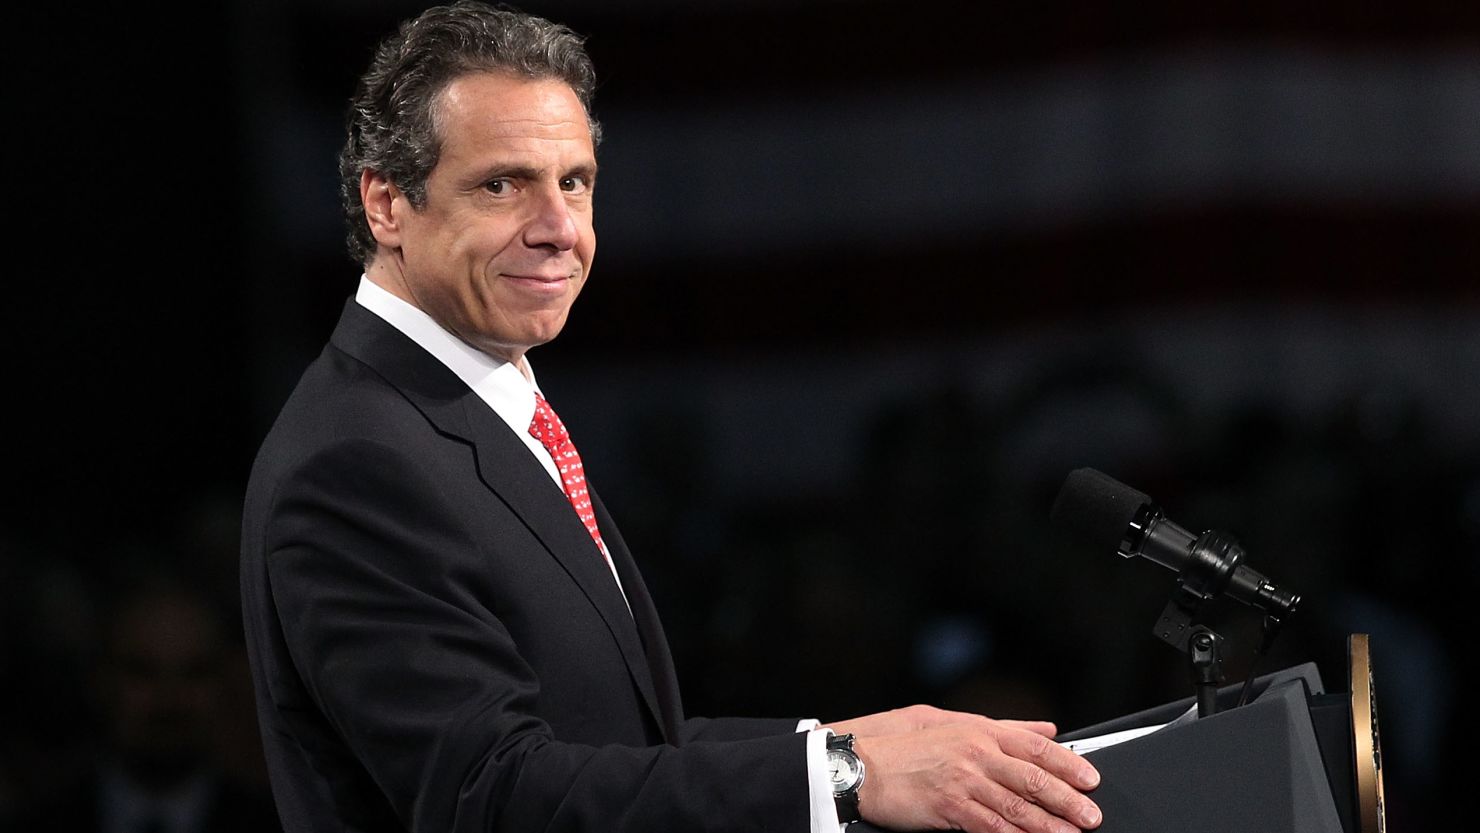 New York Gov. Andrew Cuomo said the state will offer college-level courses at 10 New York prisons.